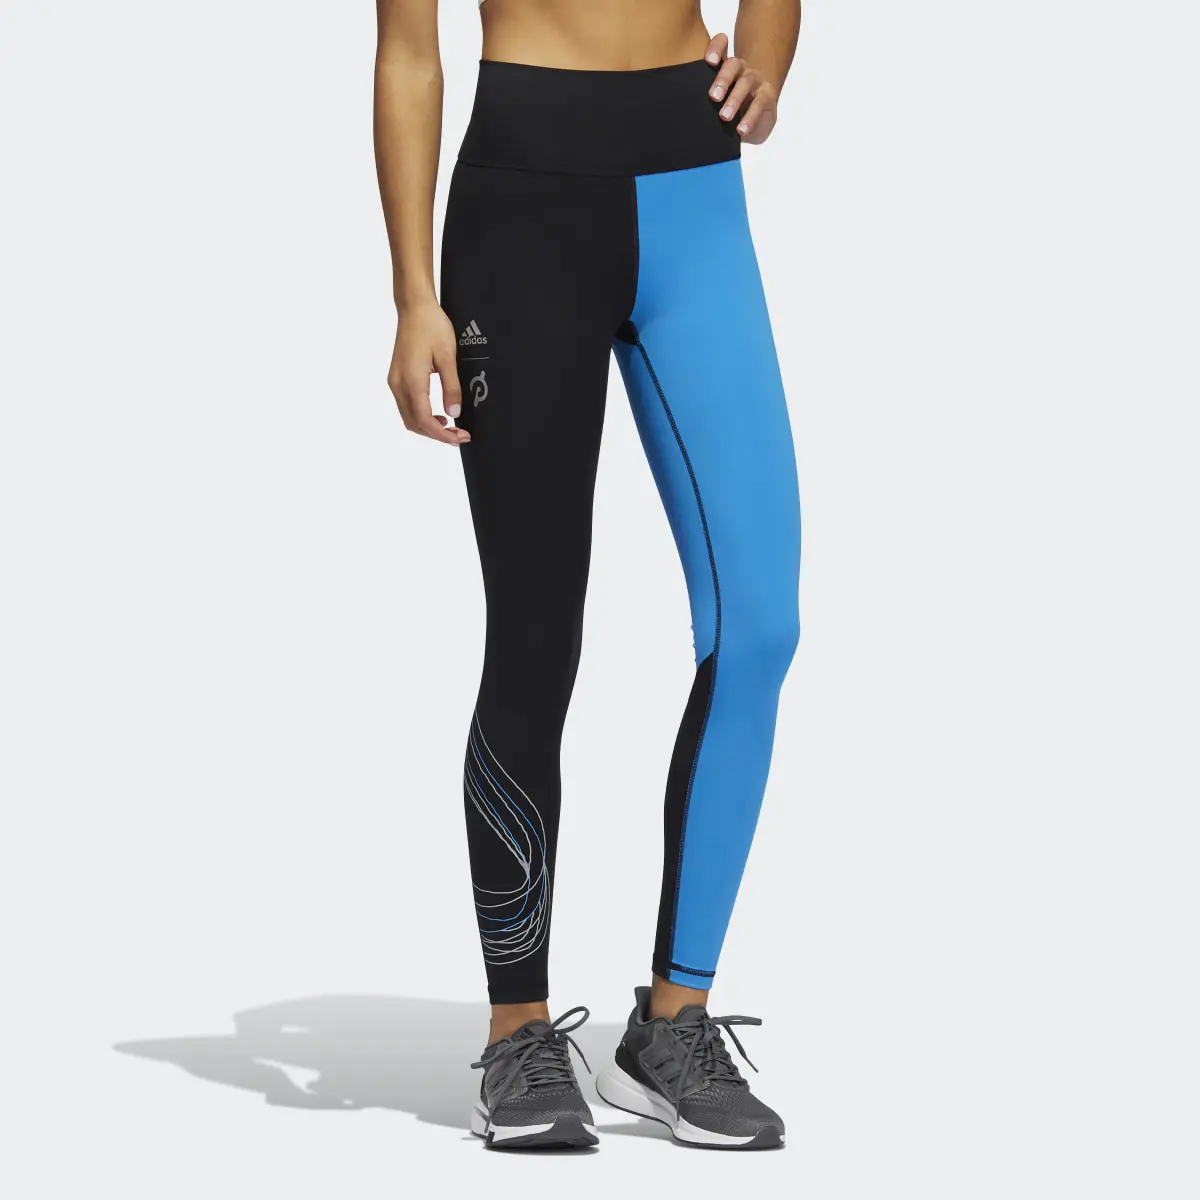 Adidas Capable of Greatness 7/8 Tights. 1